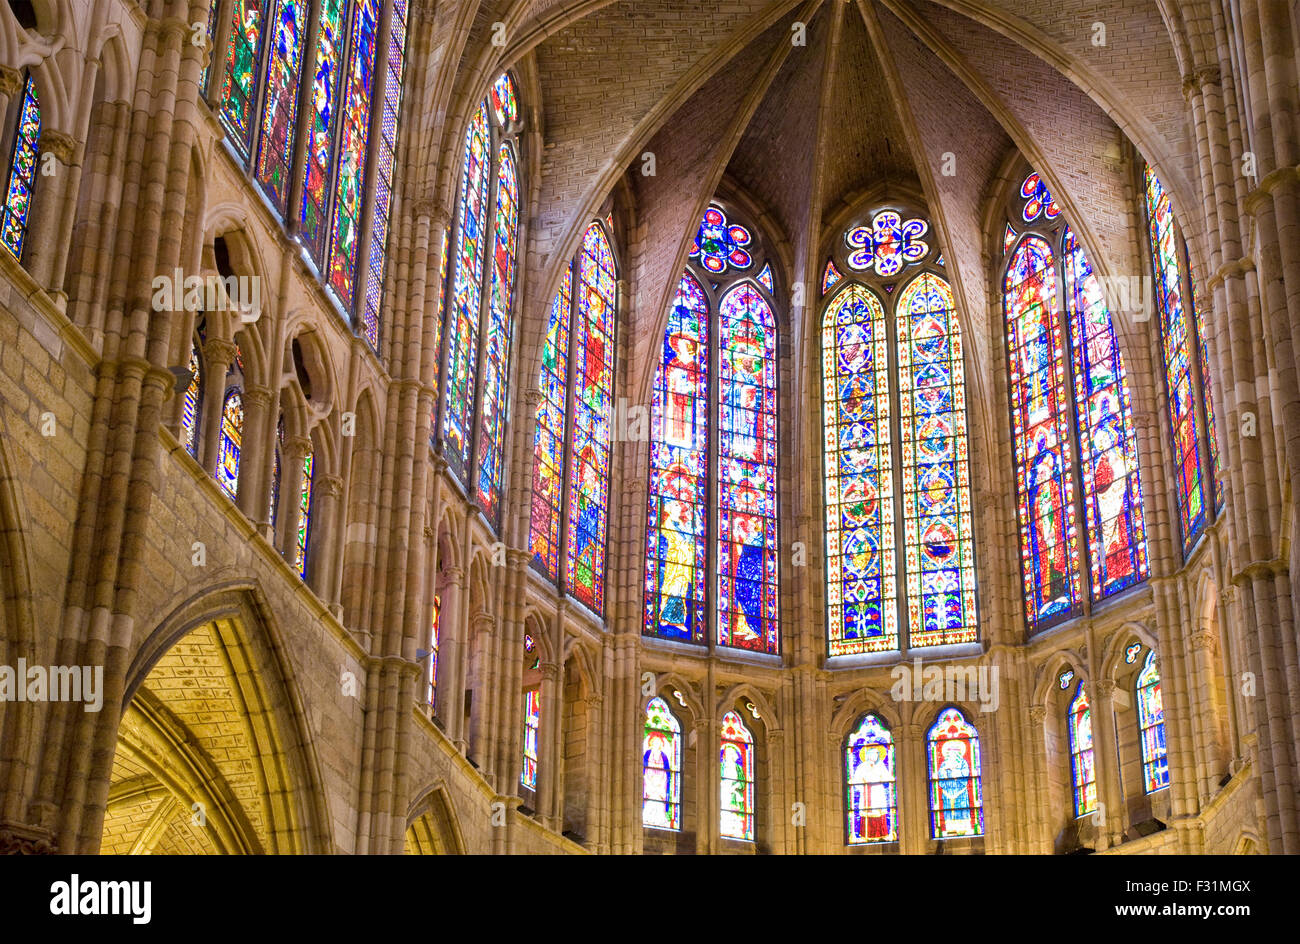 The famous interior and stained glass windows of the Leon Cathedral in Spain Stock Photo